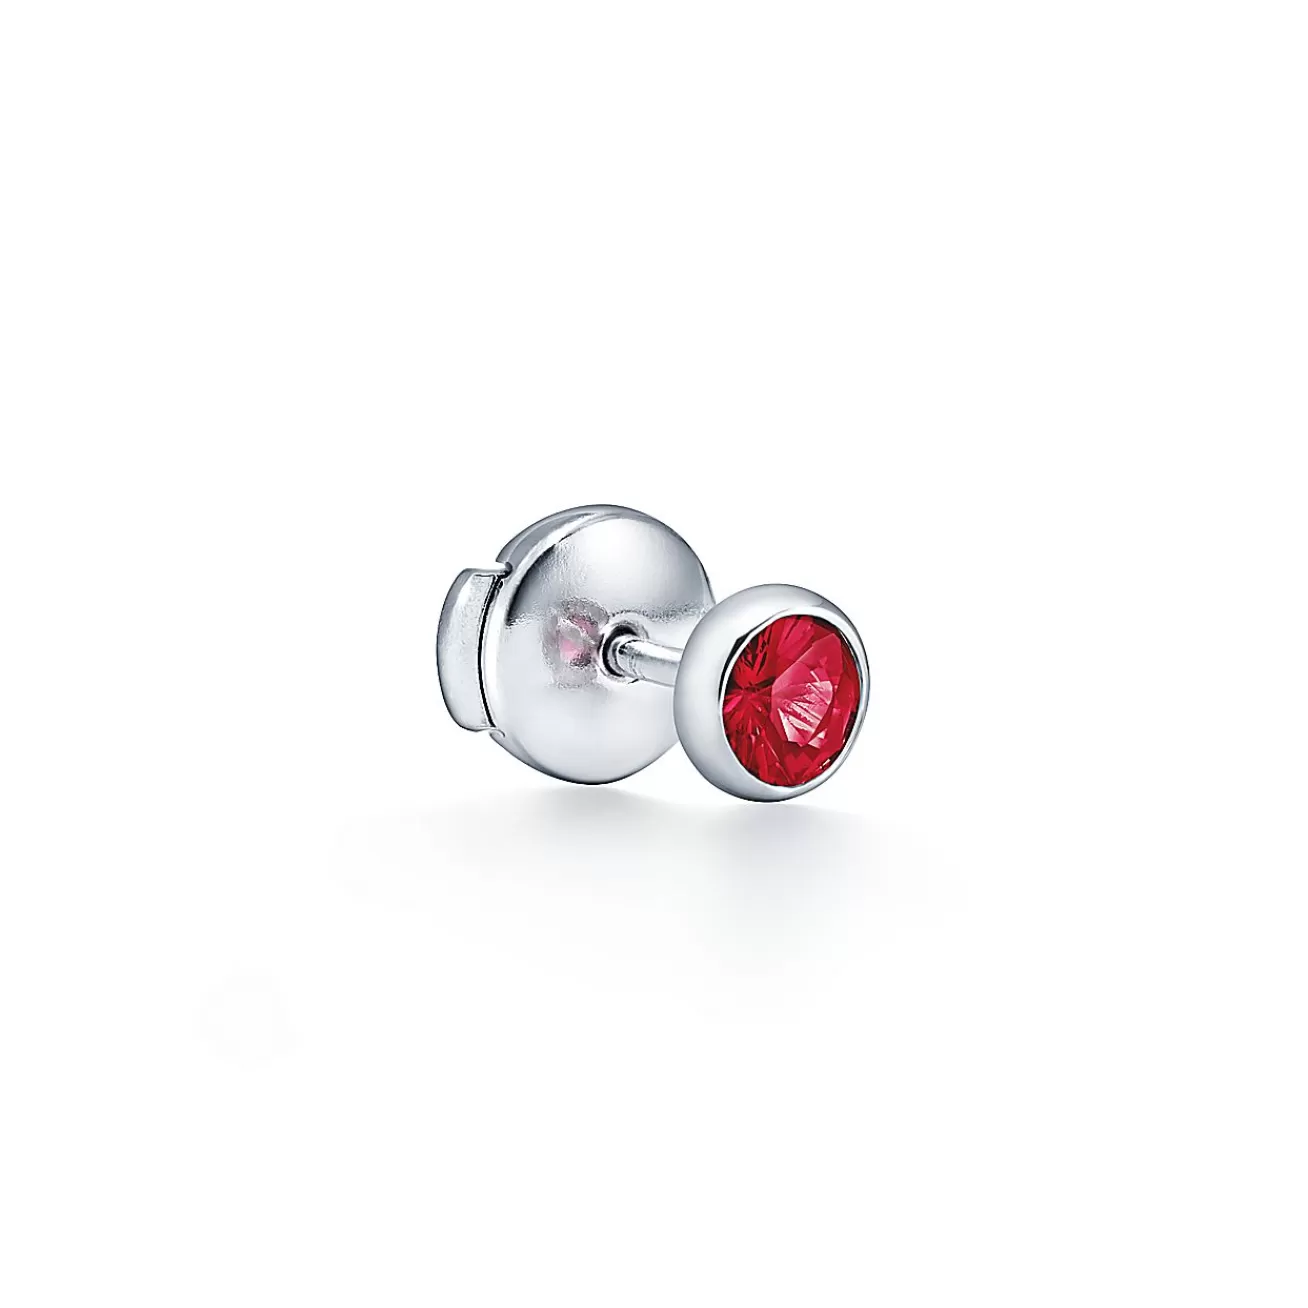 Tiffany & Co. Elsa Peretti® Color by the Yard earrings in platinum with rubies. | ^ Platinum Jewelry | Colored Gemstone Jewelry